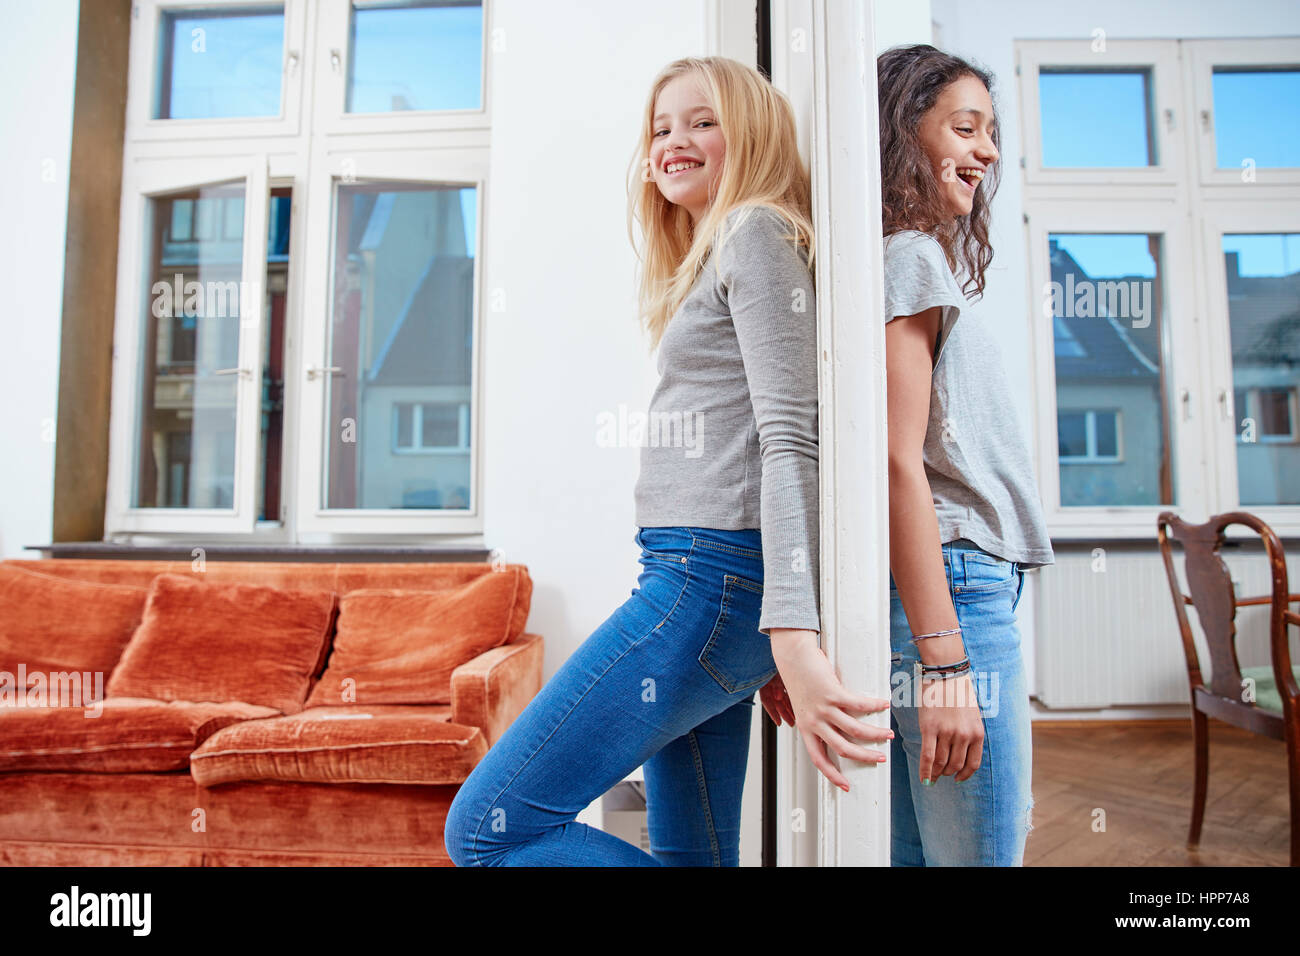 Two happy girls standing  on opposite sides of a door Stock Photo